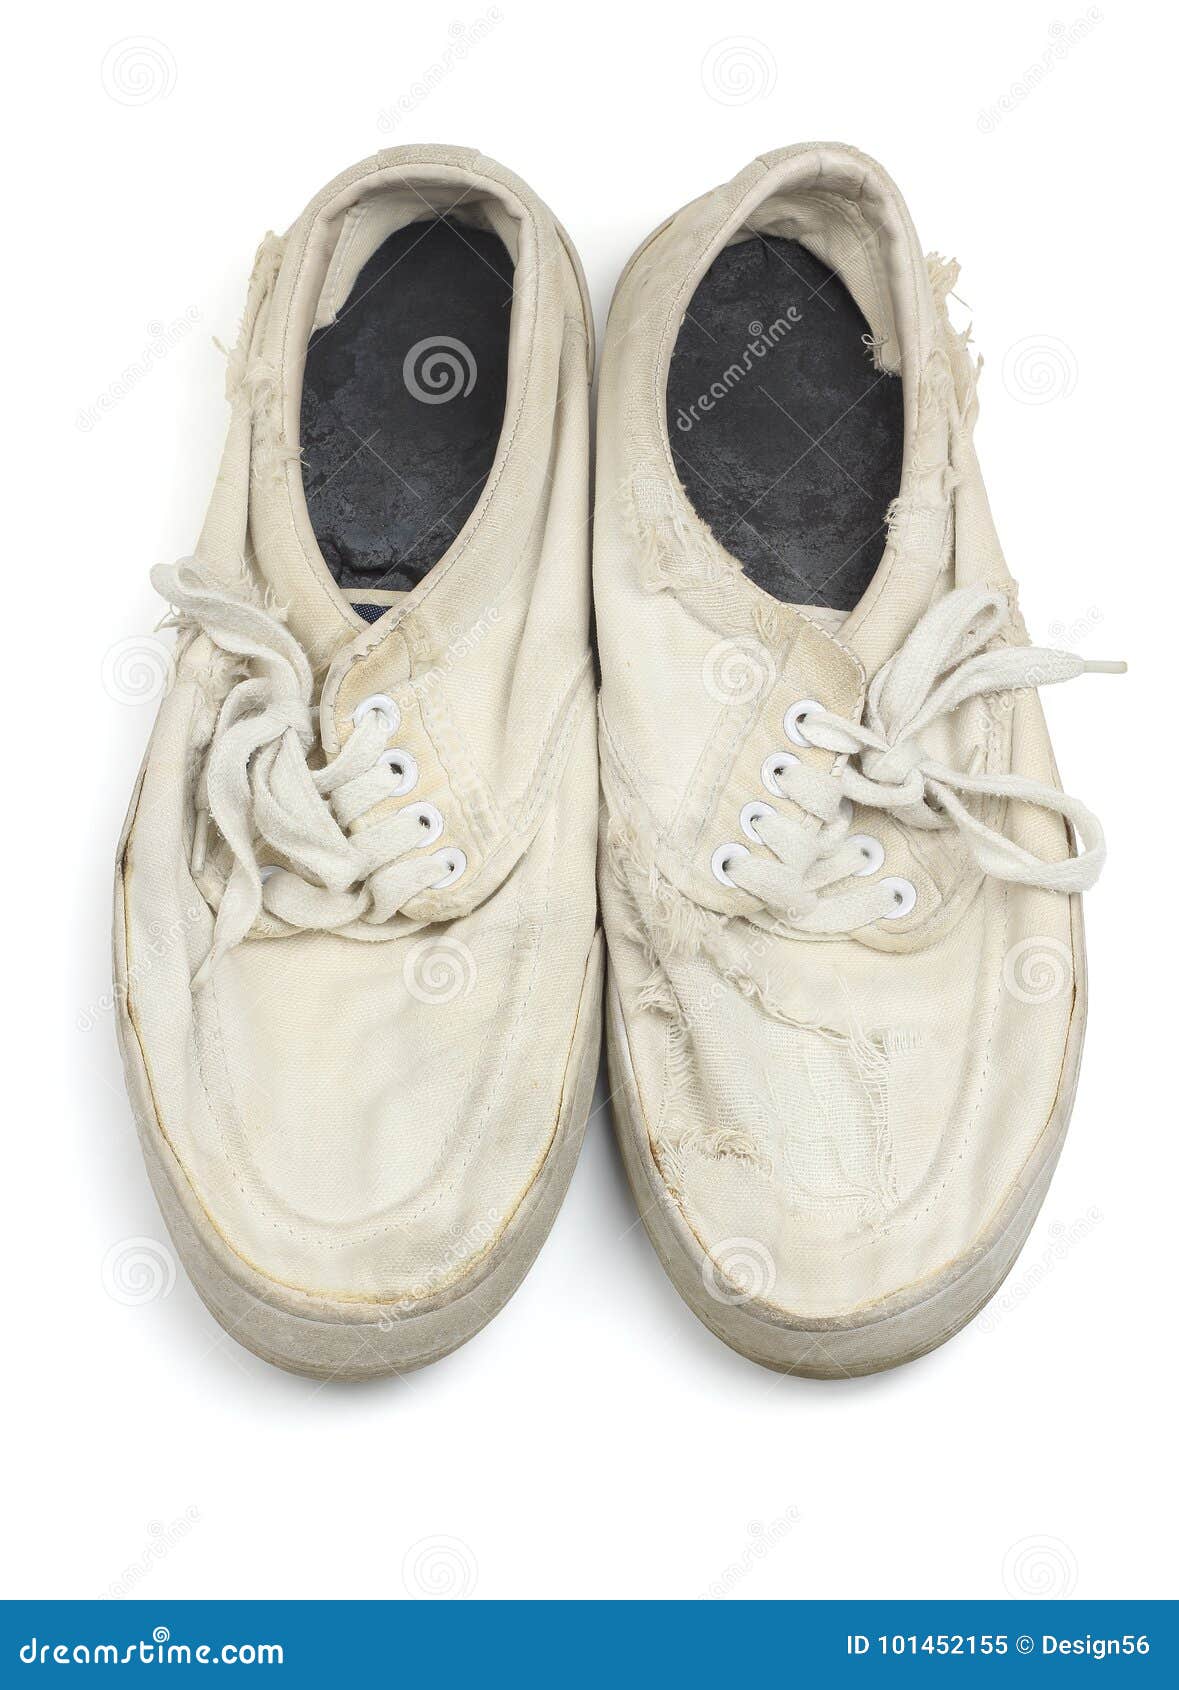 Worn Canvas Shoes stock image. Image of torn, background - 101452155